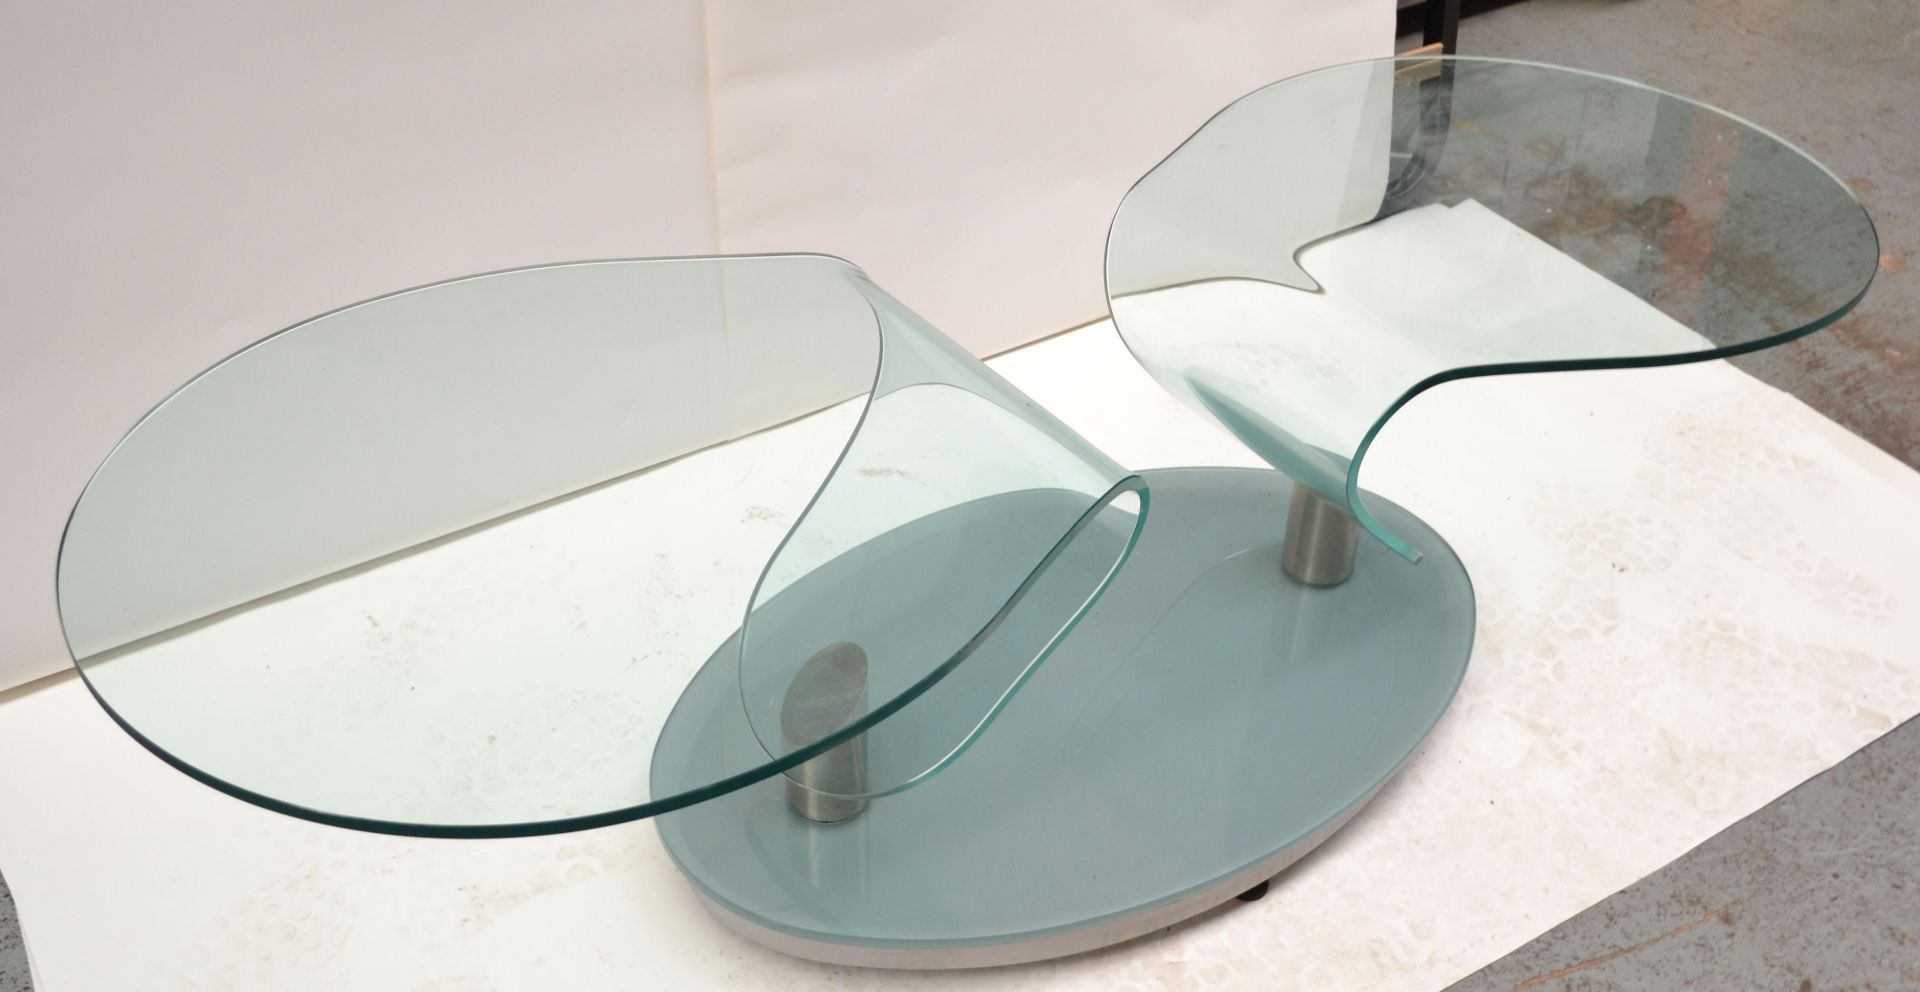 1 x Contemporary Swivelling Glass Coffee Table - AE007 - CL007 - Location: Altrincham WA14 - Image 5 of 13